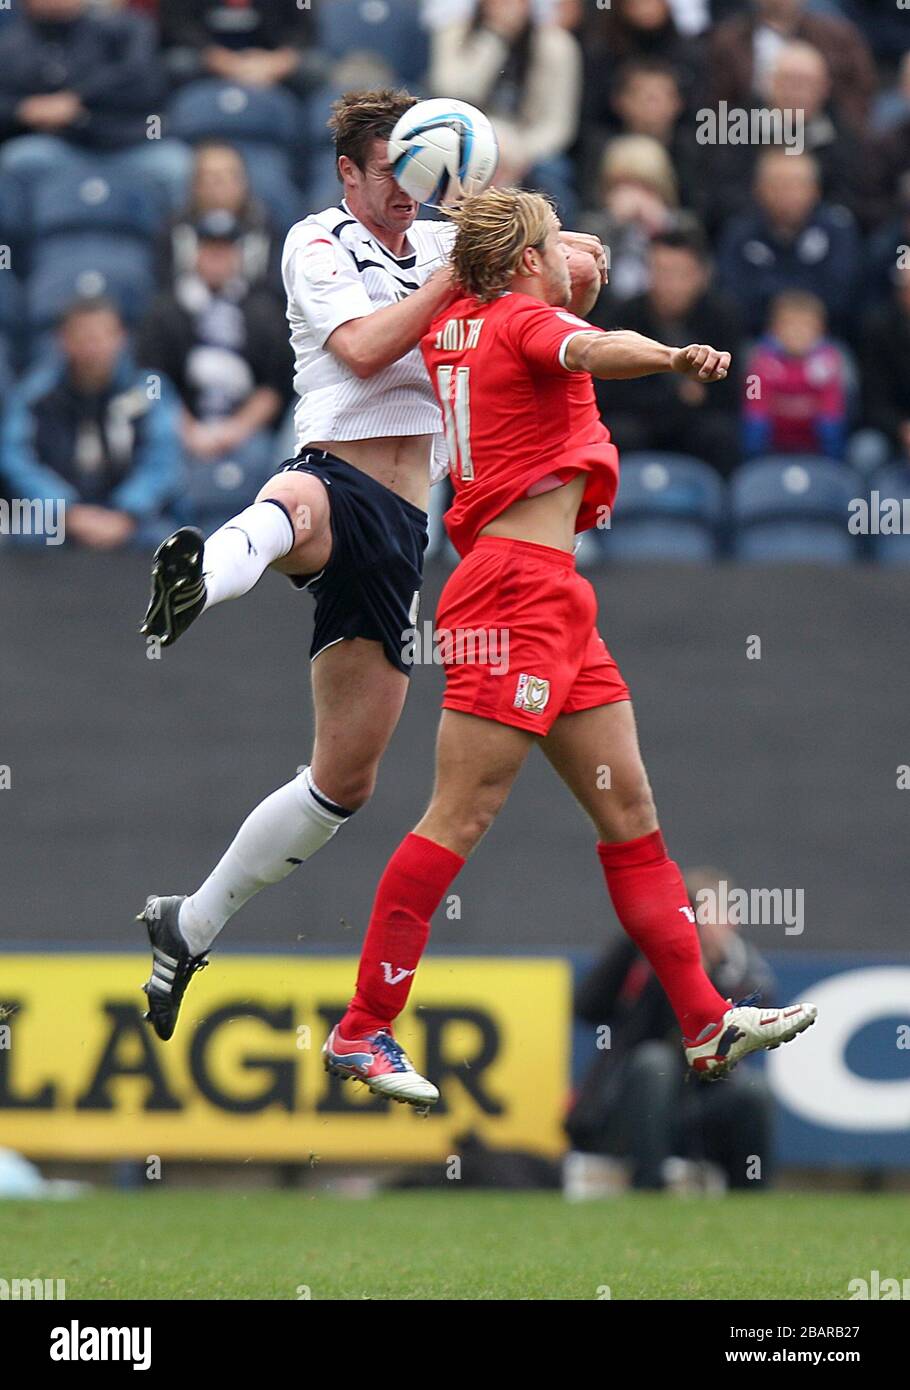 Preston North End's Paul Huntington (left) and Milton Keynes Dons' Alan Smith battle for the ball in the air Stock Photo